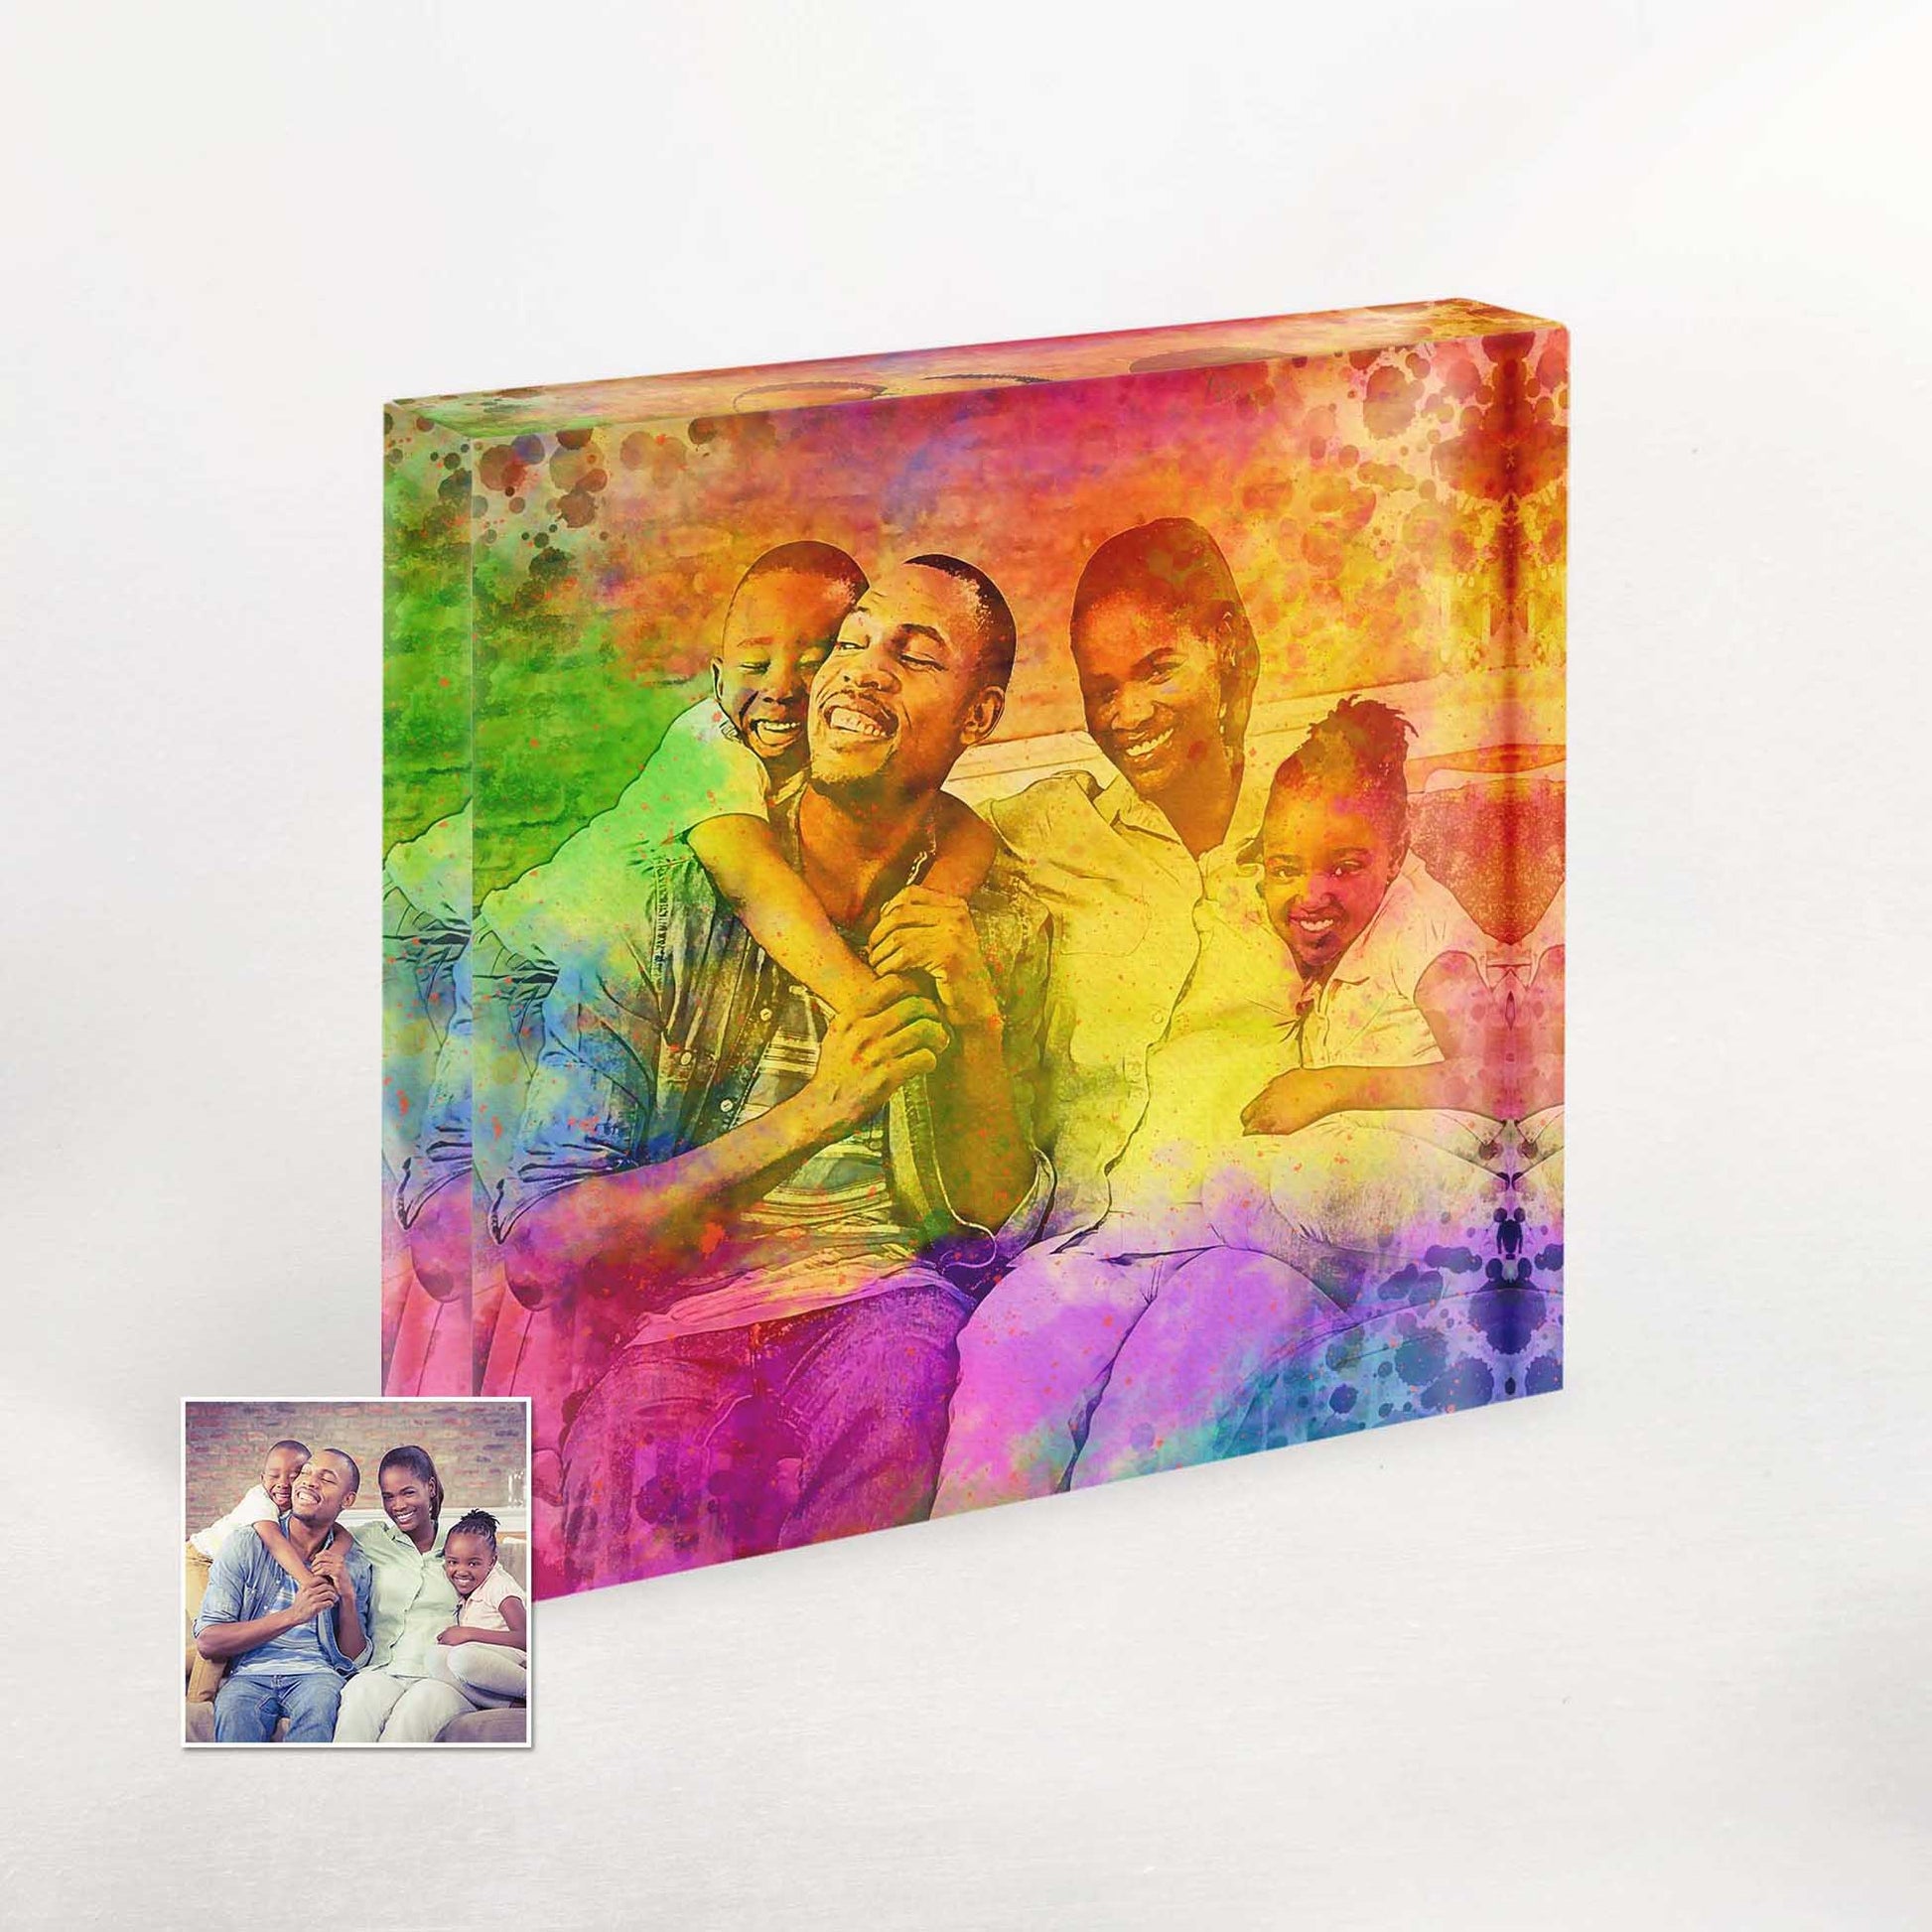 Our Personalised Splash of Colours Acrylic Block Photo is a true work of art that brings a fresh perspective to your surroundings. Its lively composition and bold color choices energize the atmosphere, making it an instant conversation starter.